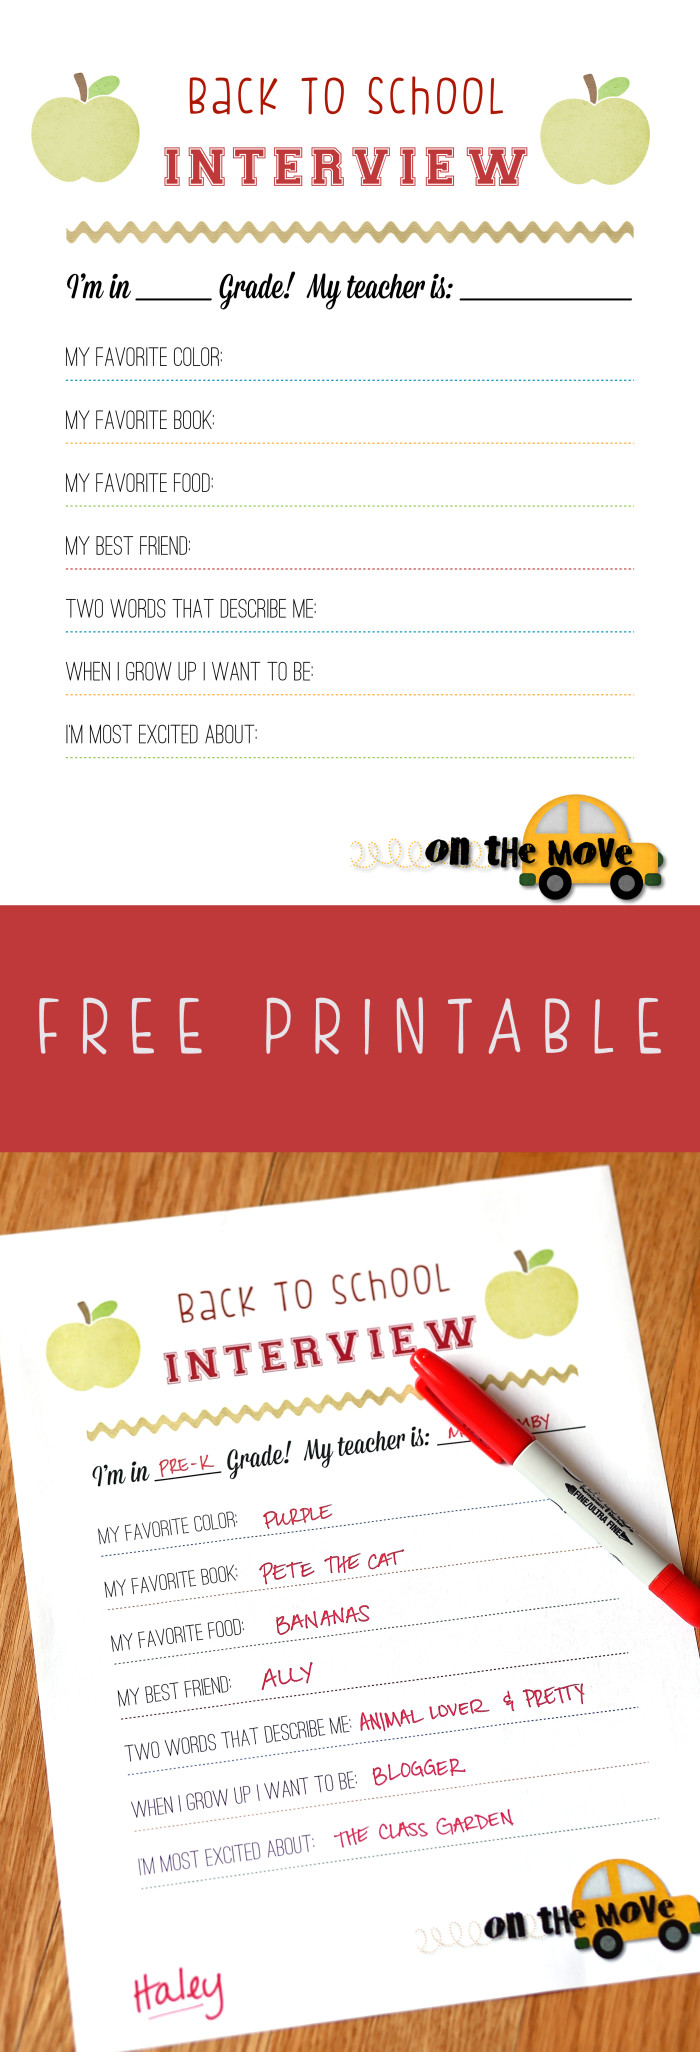 Back To School Interview FREE PRINTABLE